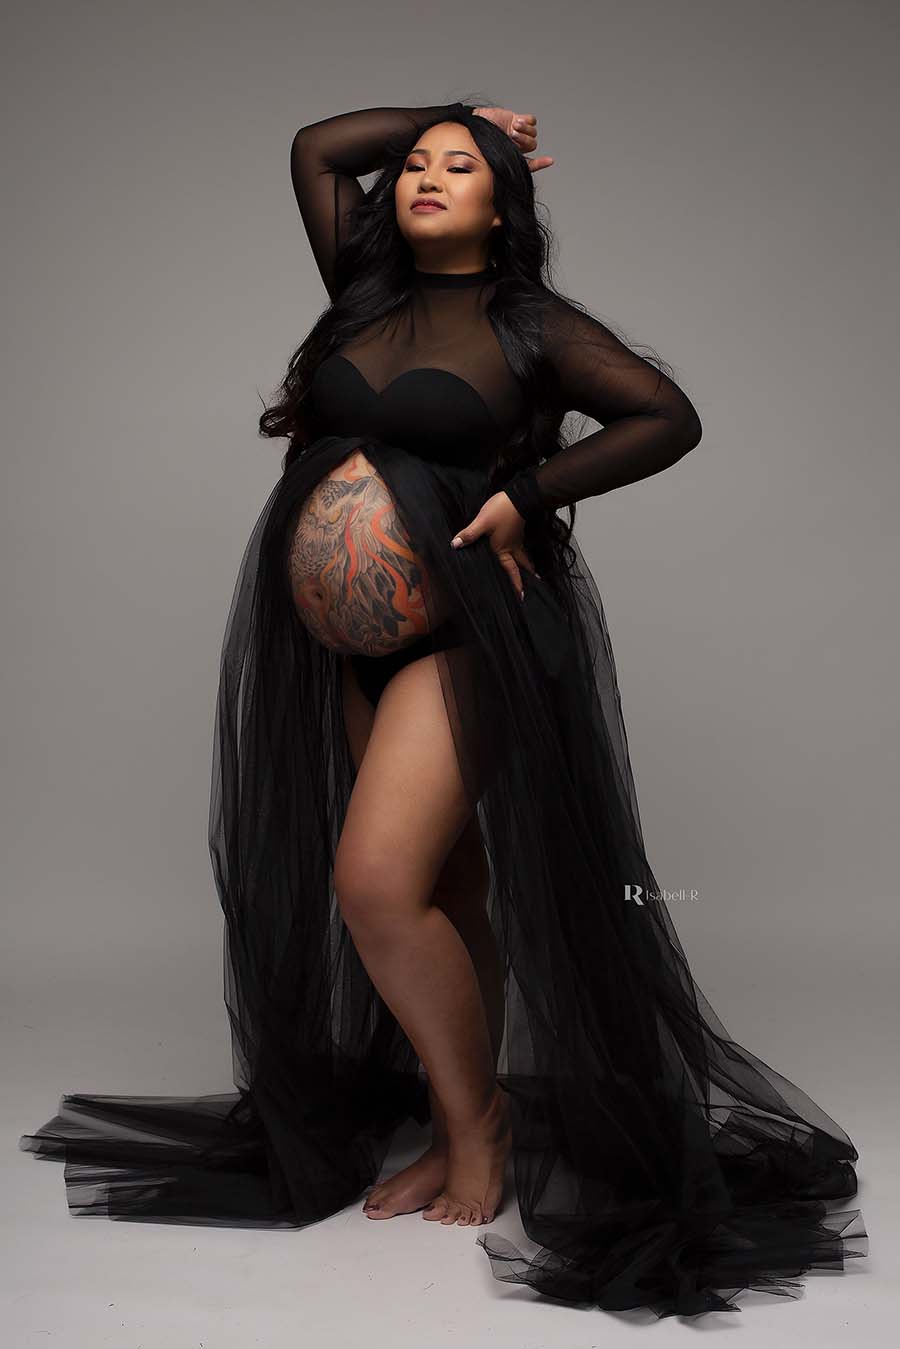 a woman is wearing a long black dress with a tulle skirt. The dress is open at the front . You can see her pregnant belly with a huge tattoo on it. She is wearing a black bra underneath